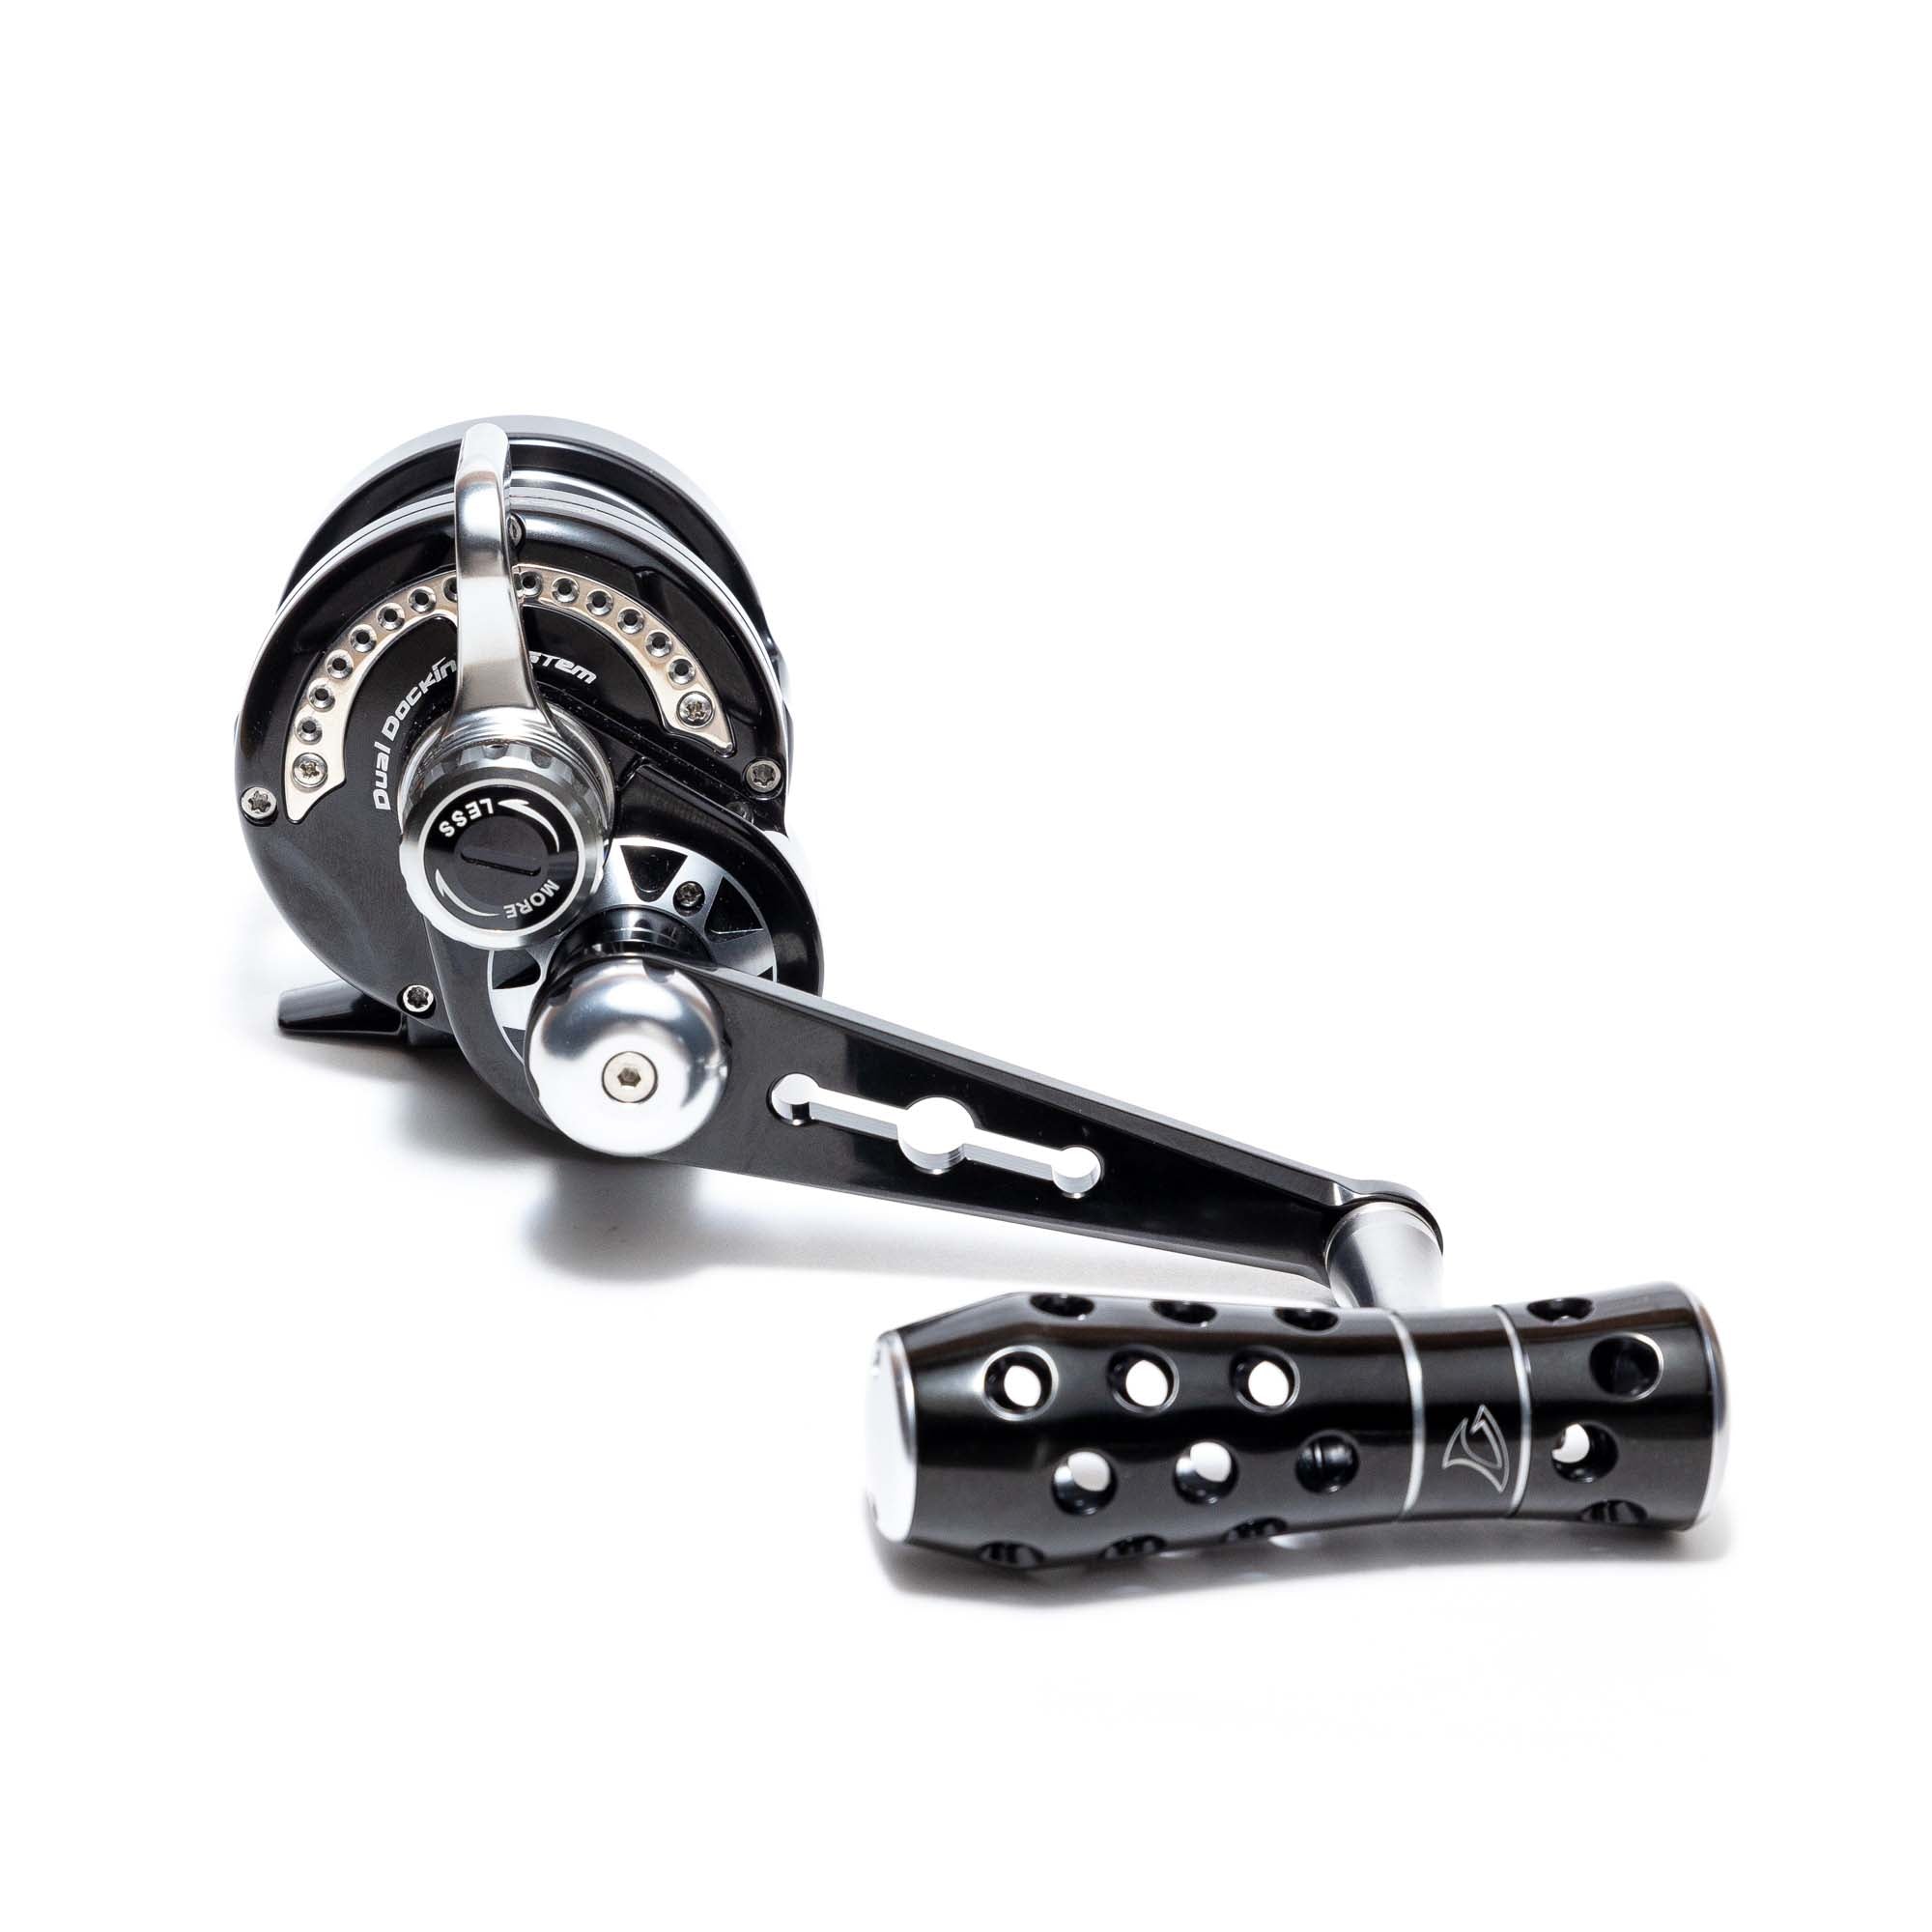 JIGGING MASTER Extreme Jigging Righthanded Reel UNDERHEAD PE5